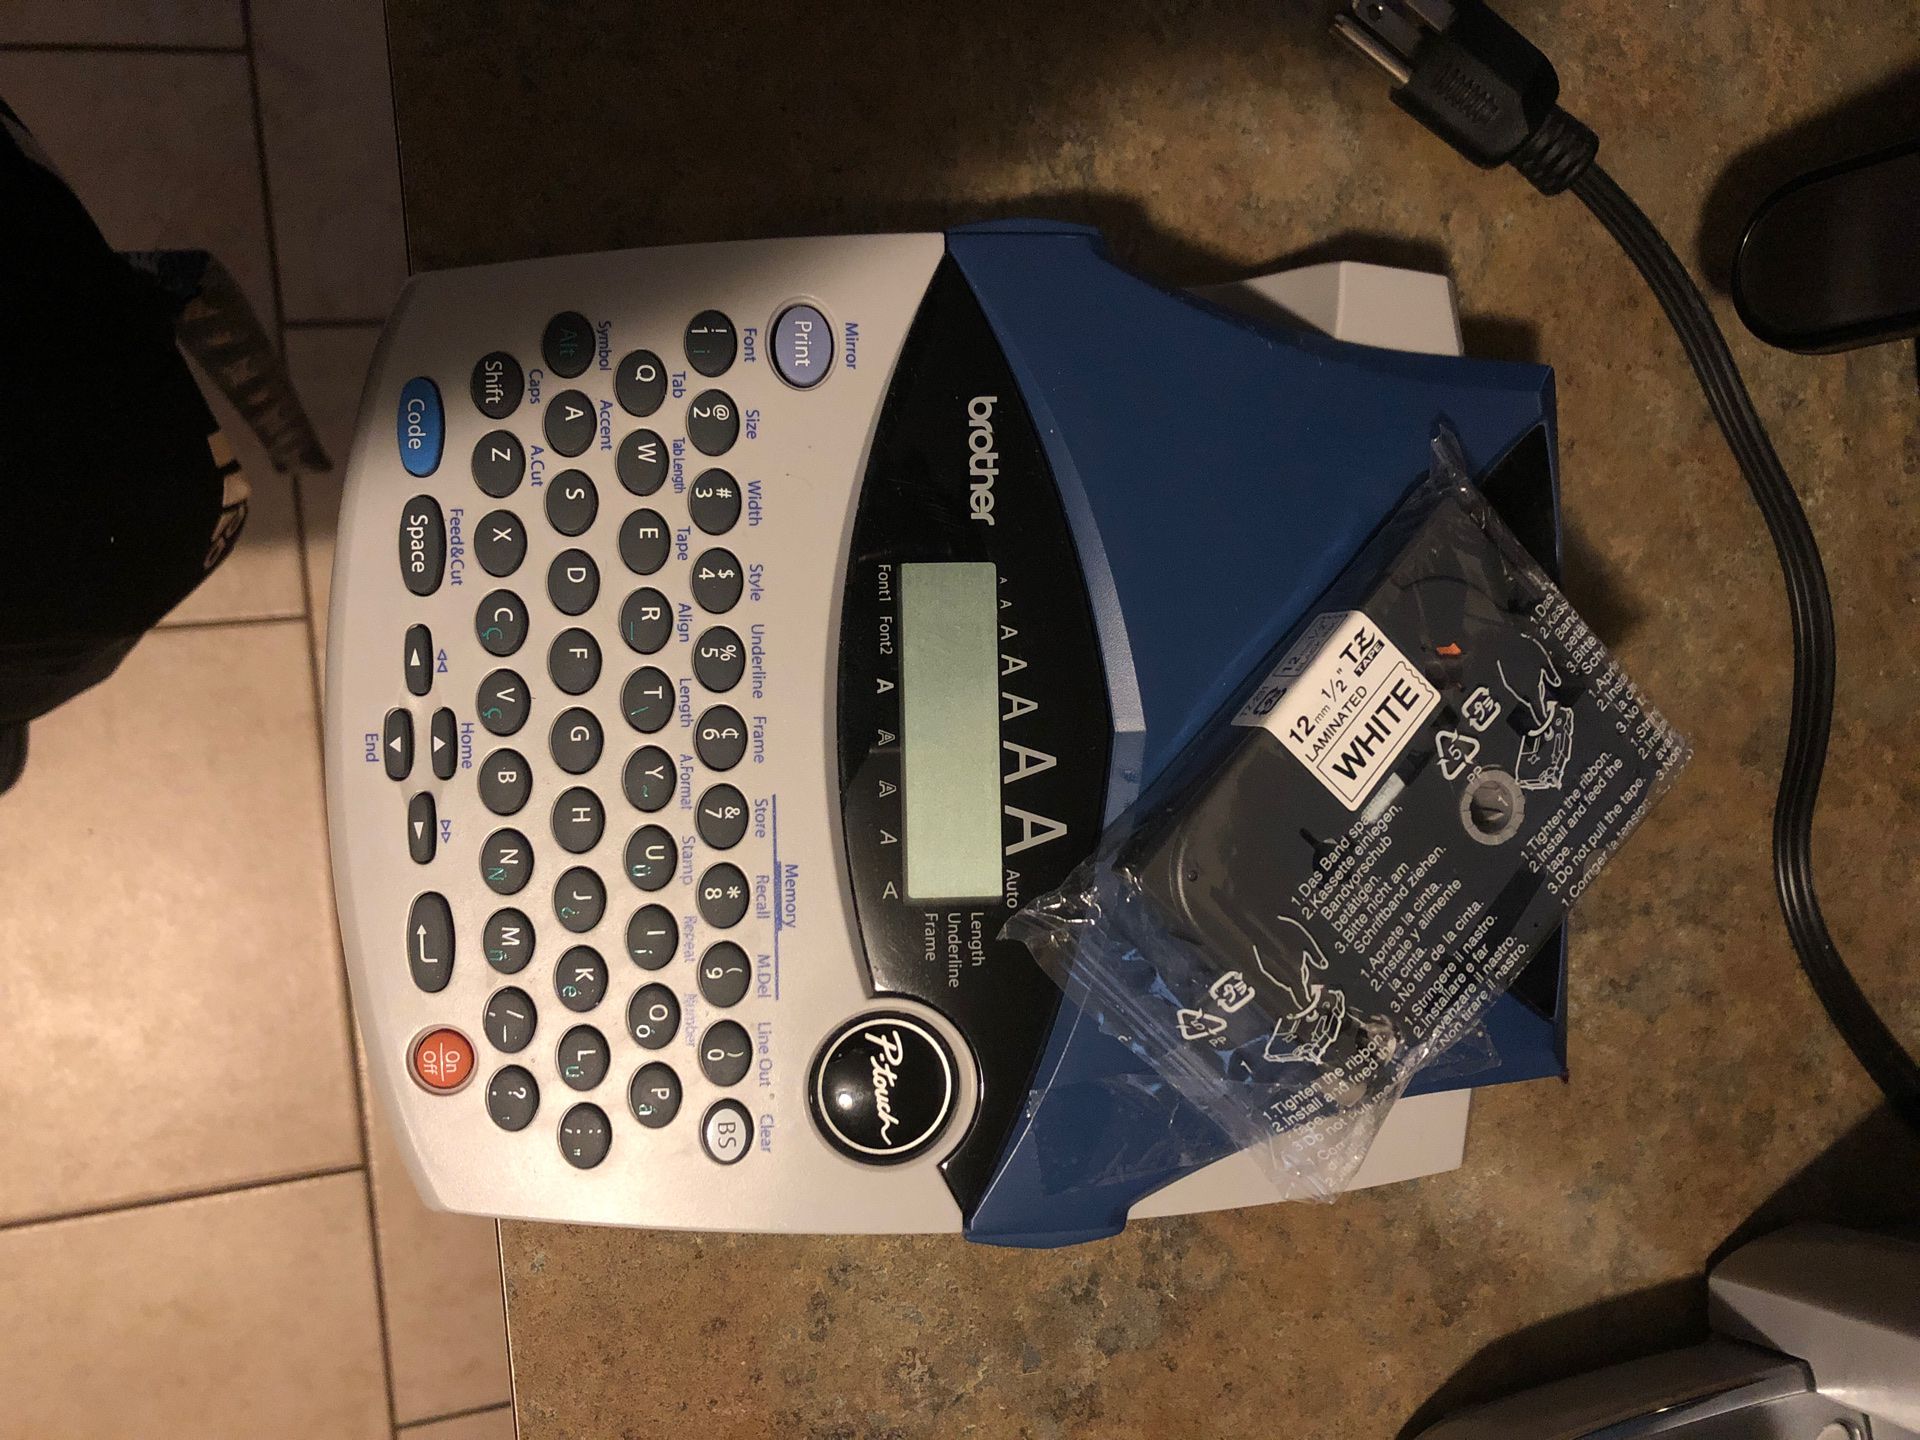 P-Touch Brother label maker